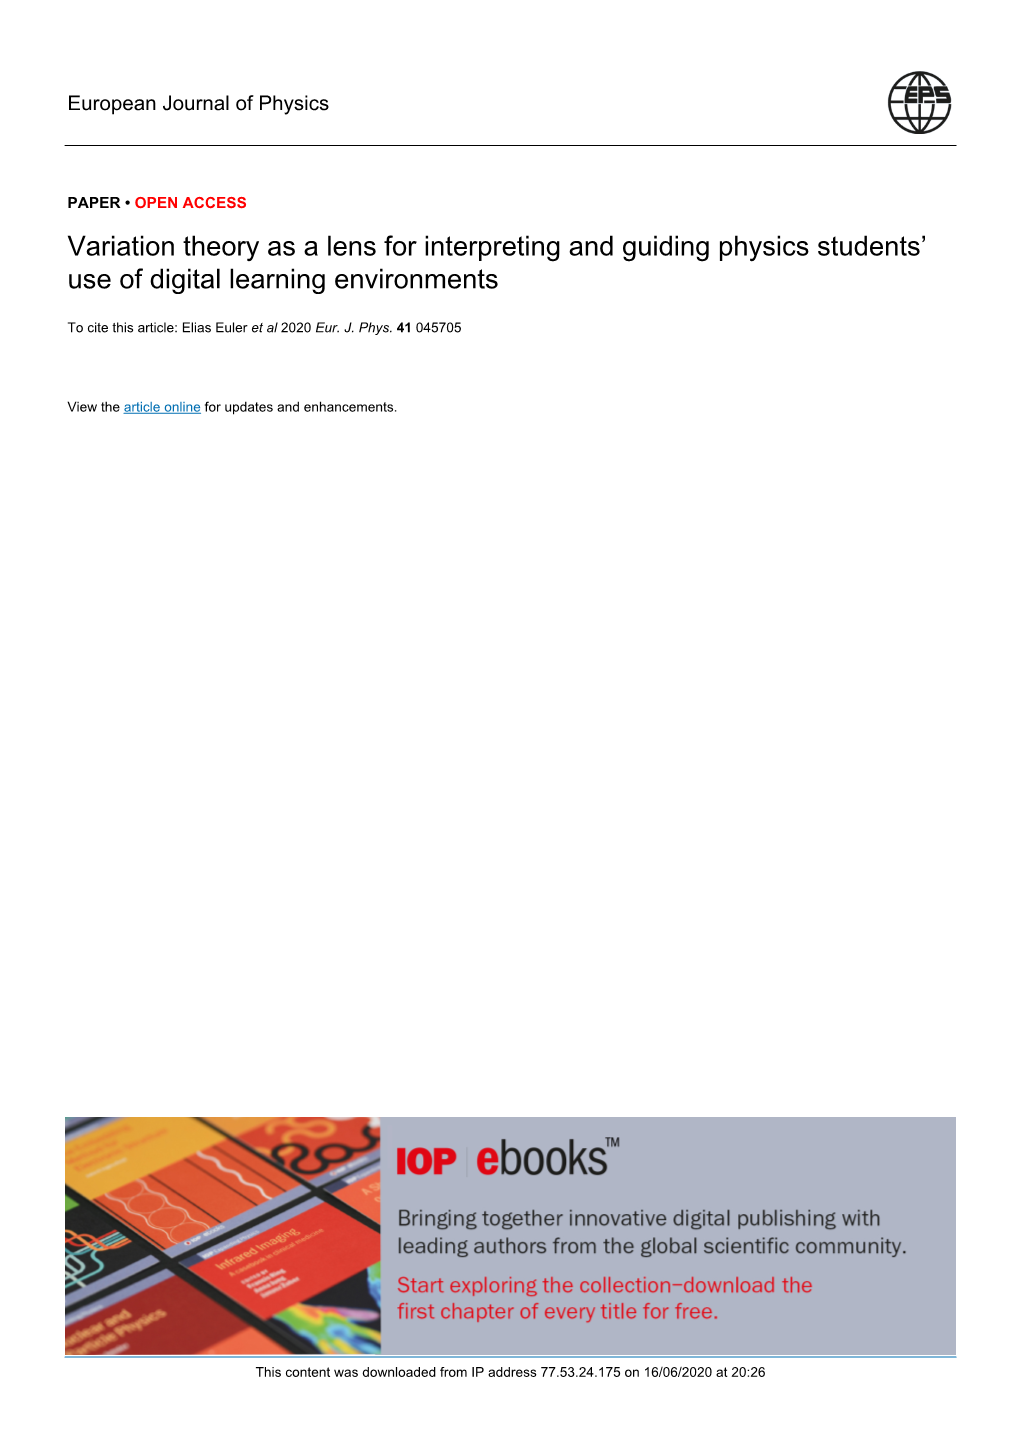 Variation Theory As a Lens for Interpreting and Guiding Physics Students’ Use of Digital Learning Environments